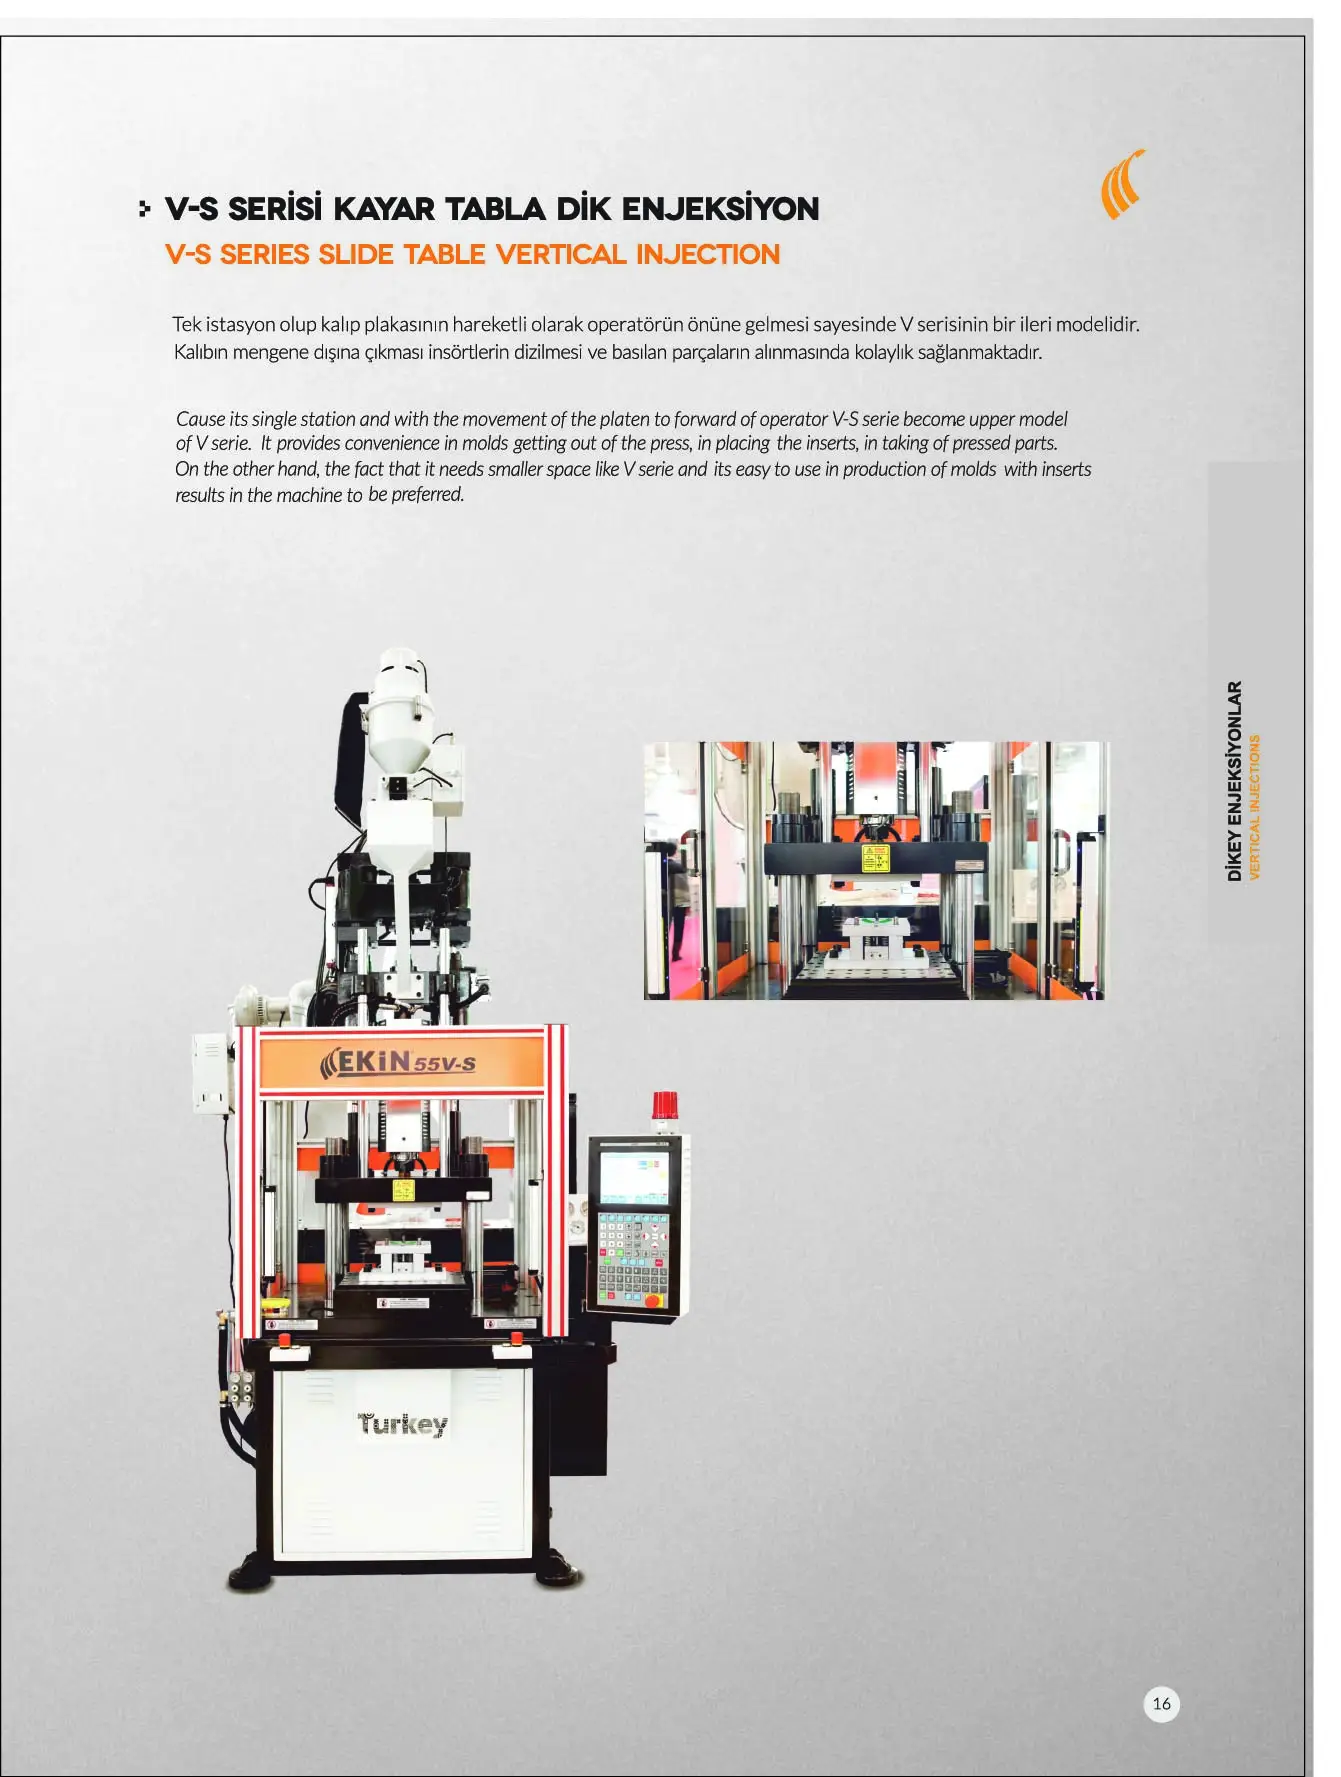 Ekin 55v 2s Two Station Sliding Table Vertical Plastic Injection Moulding Machine Made In Turkey Buy Injection Moulding Machine Vertical Injection Moulding Rubber Injection Moulding Machine Product On Alibaba Com